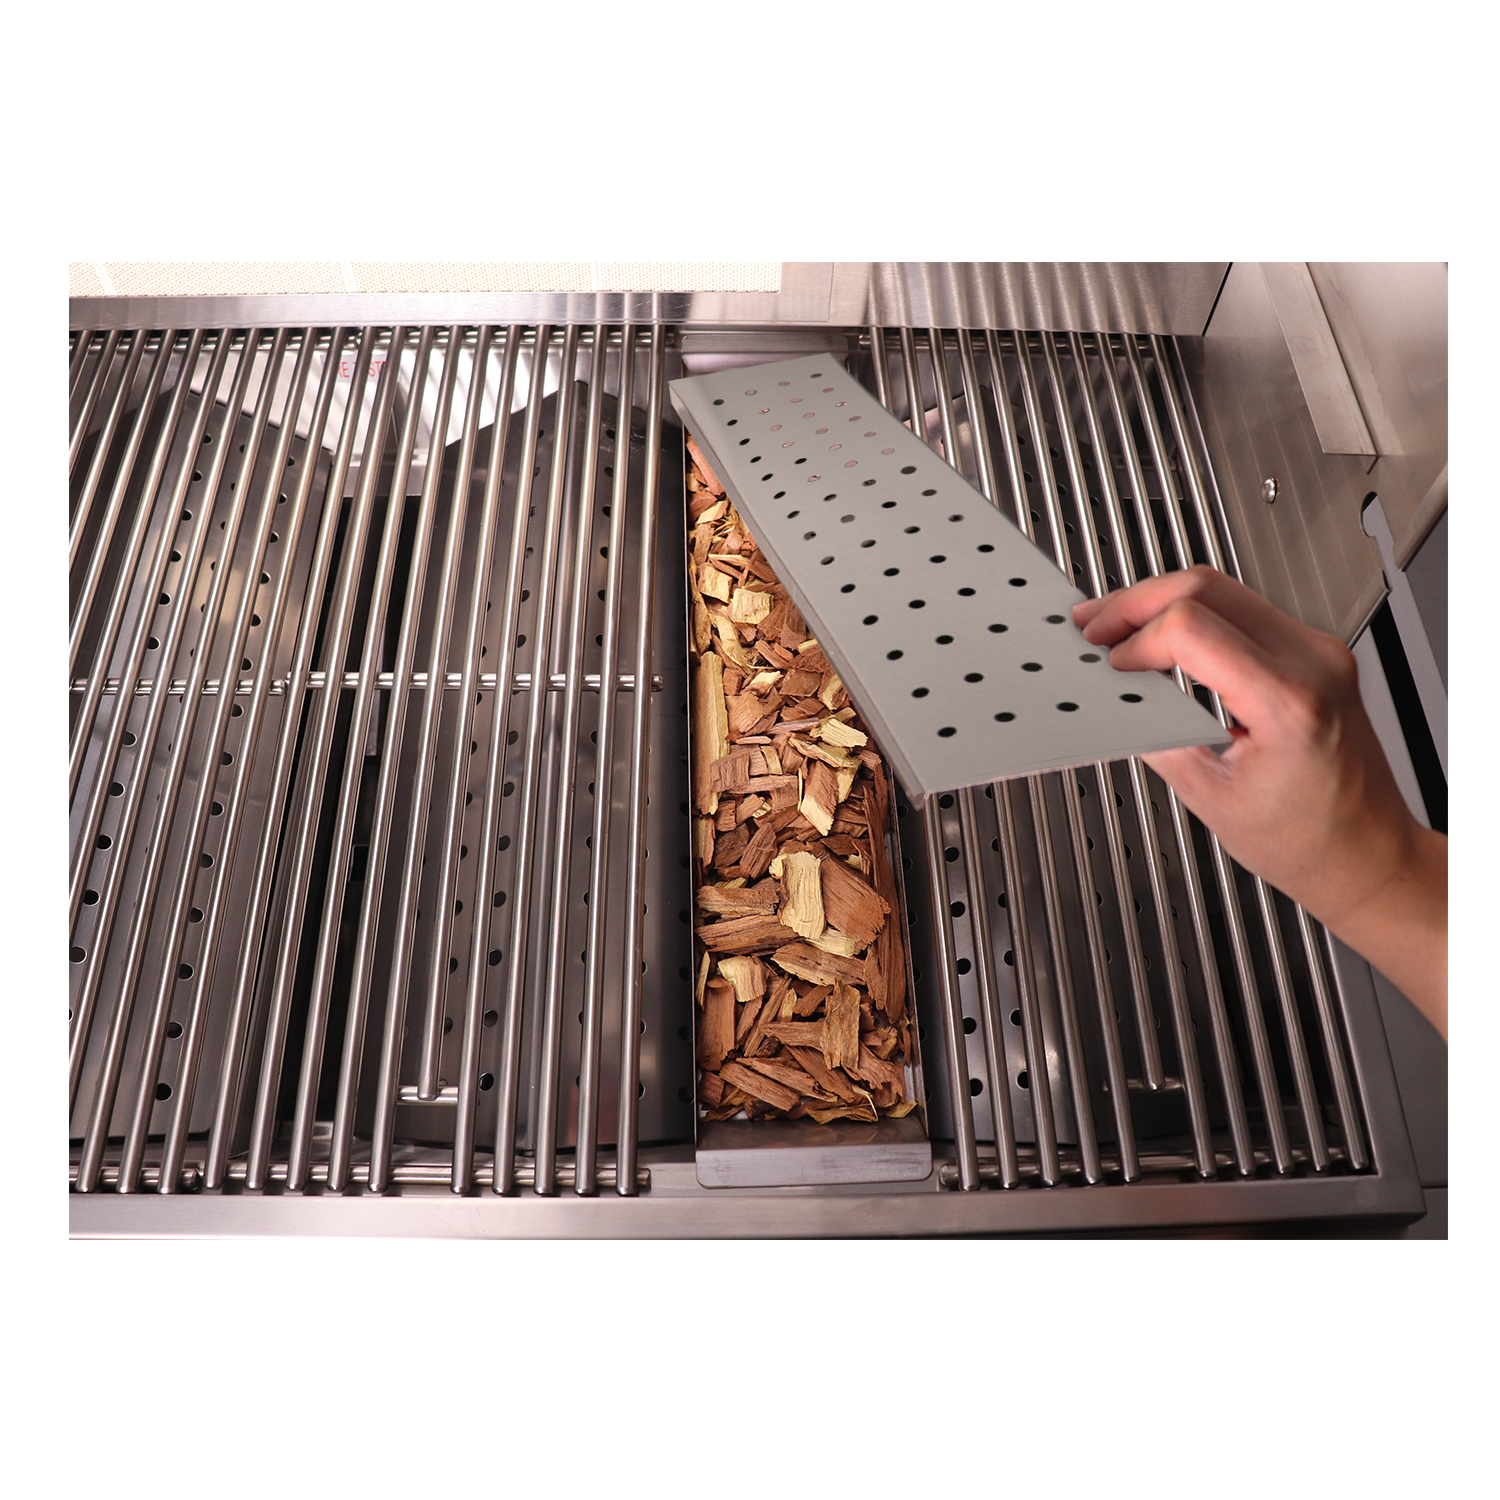 Stainless Smoker Tray for Premier Series Grills